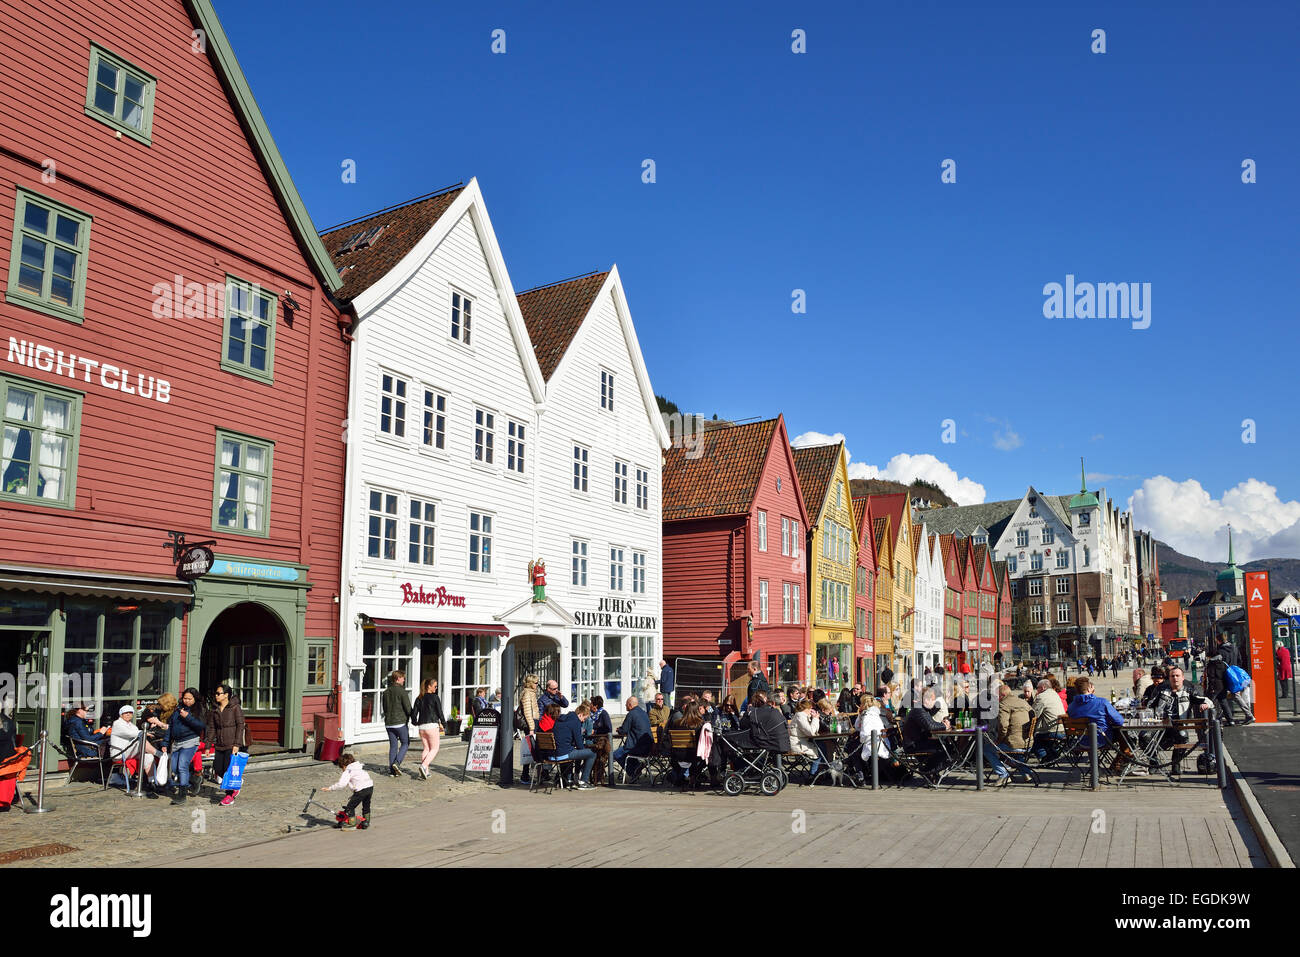 Persons sitting in a cafe, Hanseatic buildings in the background, Bryggen, UNESCO World Heritage Site Bryggen, Bergen, Hordaland, Norway Stock Photo